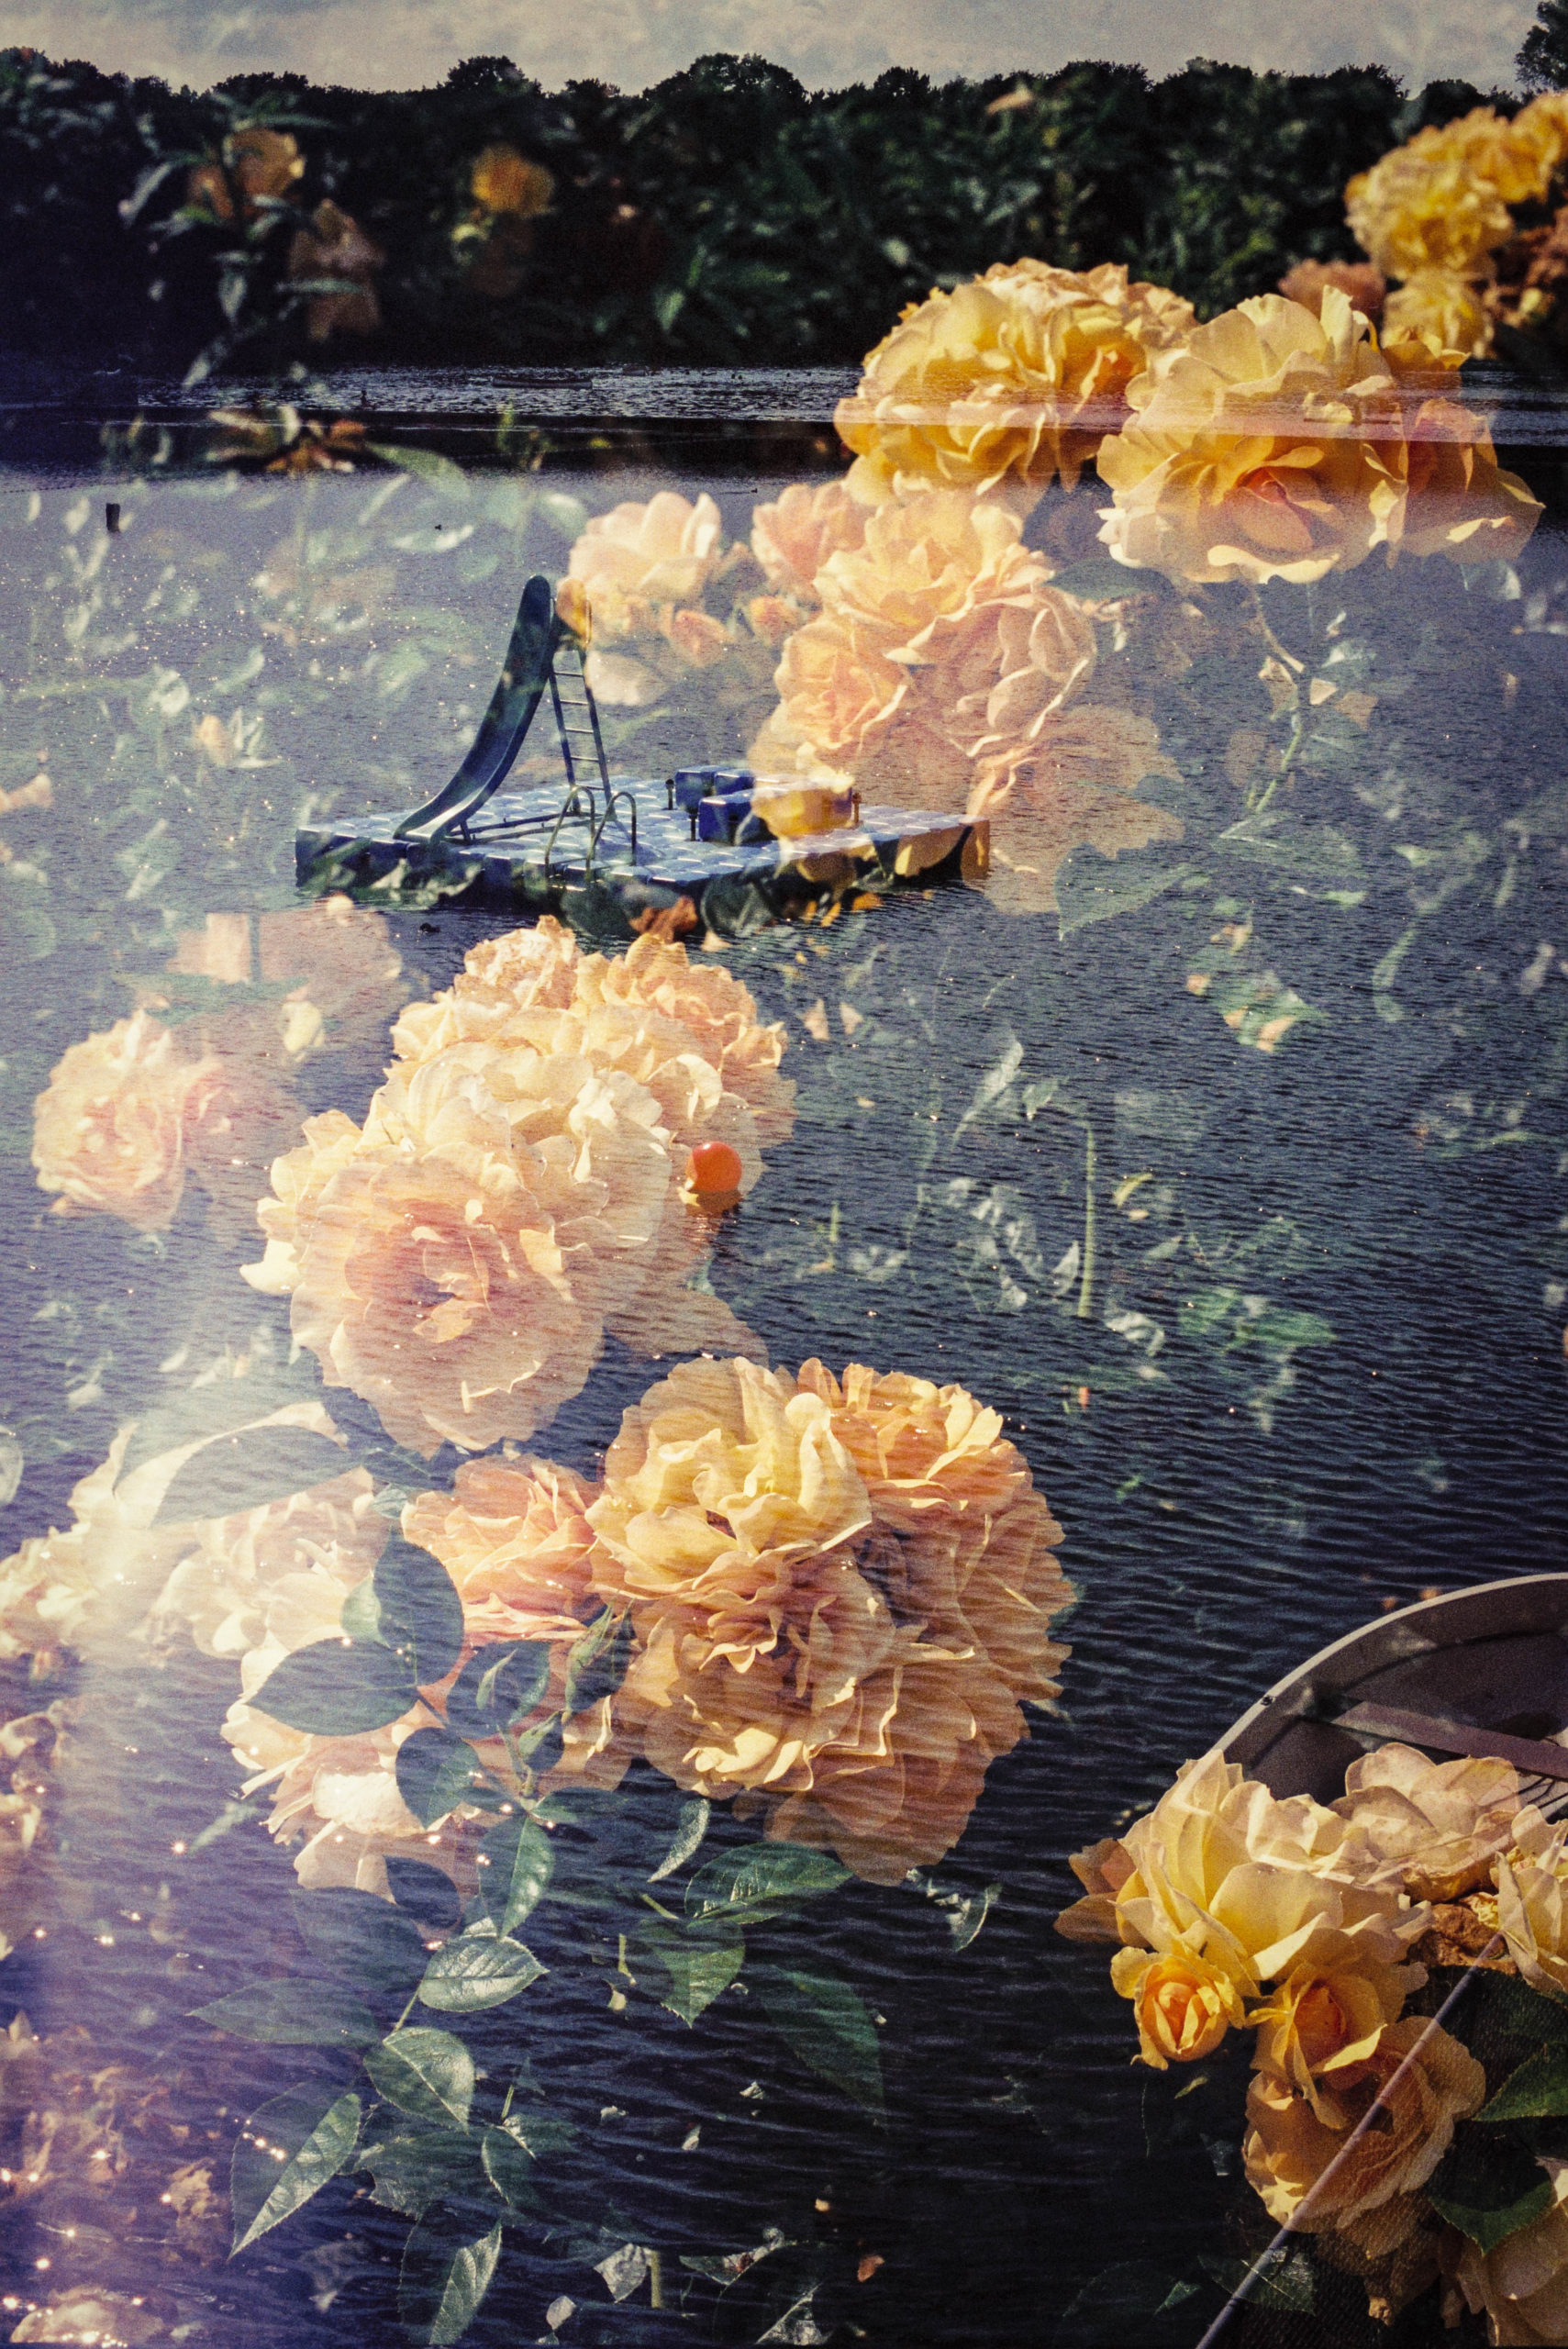 analogue double exposure of a lake and yellow roses